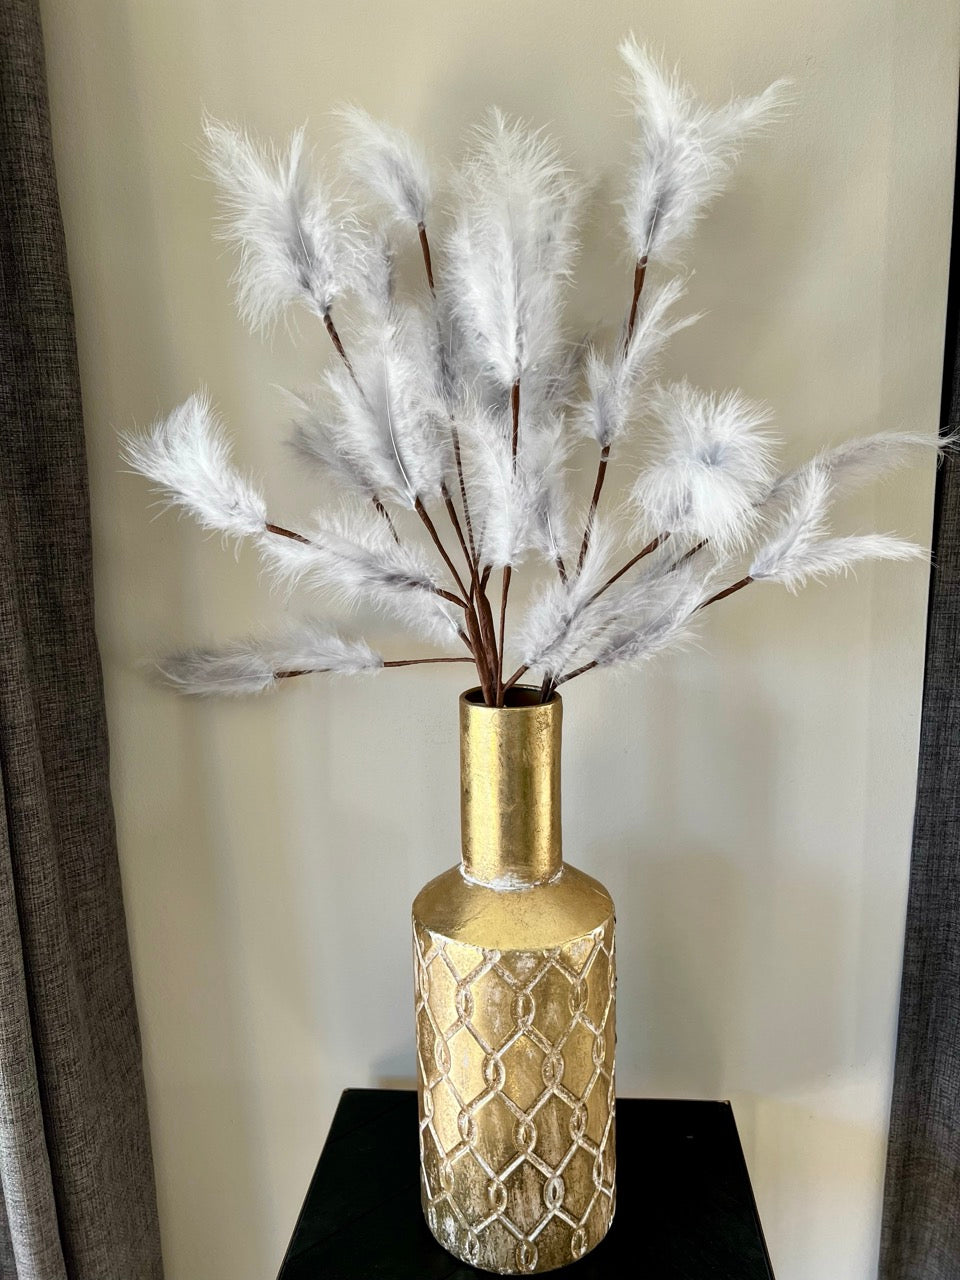 Feather plumes - Dried flowers - 77 cm high - Black/Grey